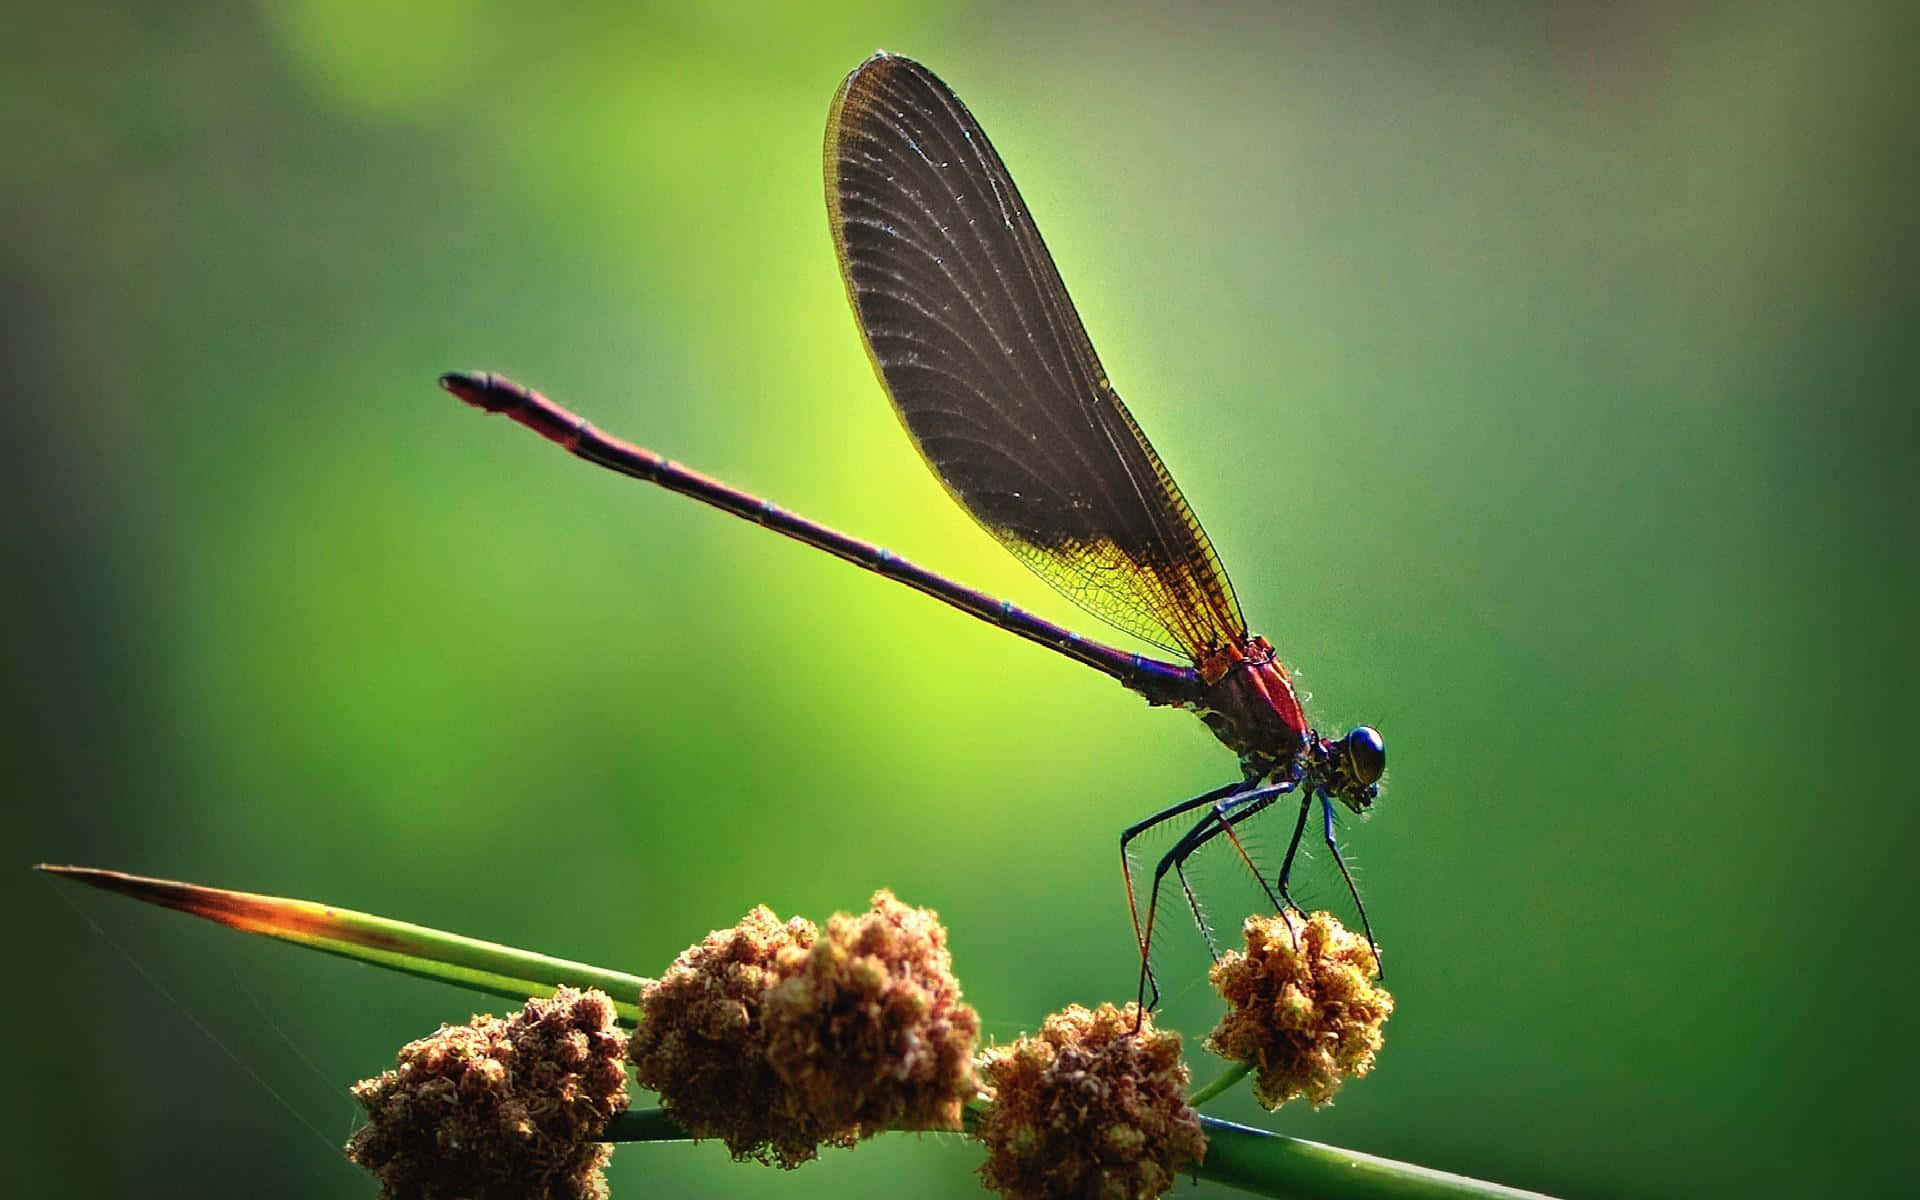 A dragonfly hovers above a tranquil body of water